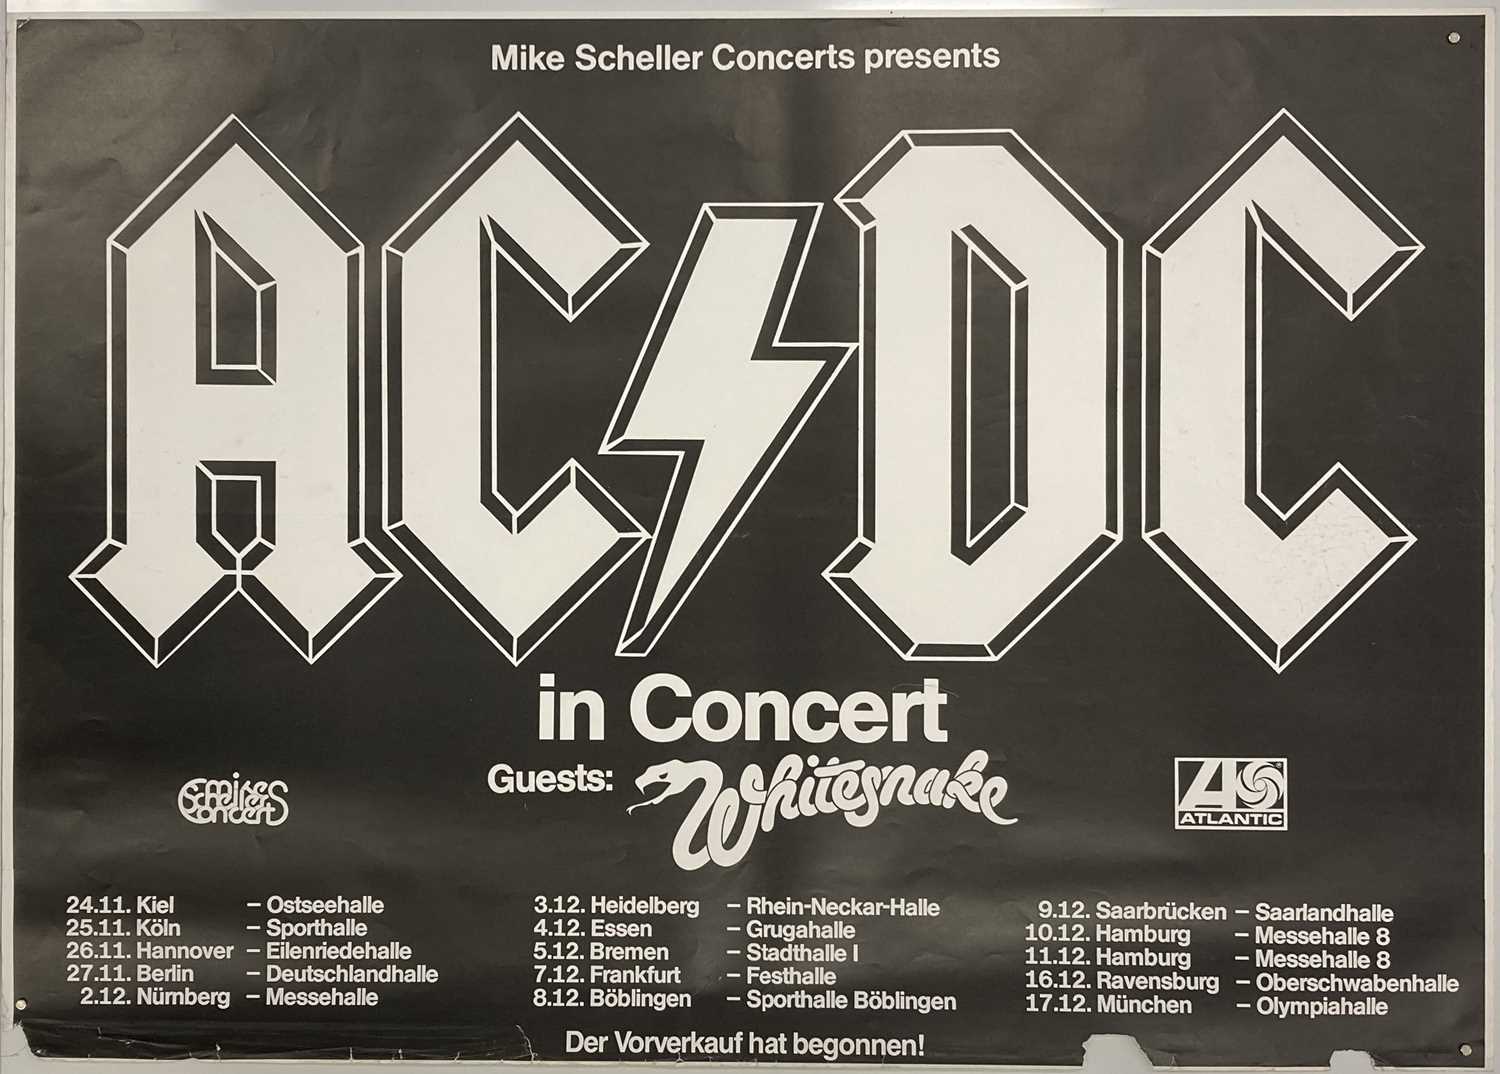 Lot 60 Acdc Back In Black 1980 Tour Poster